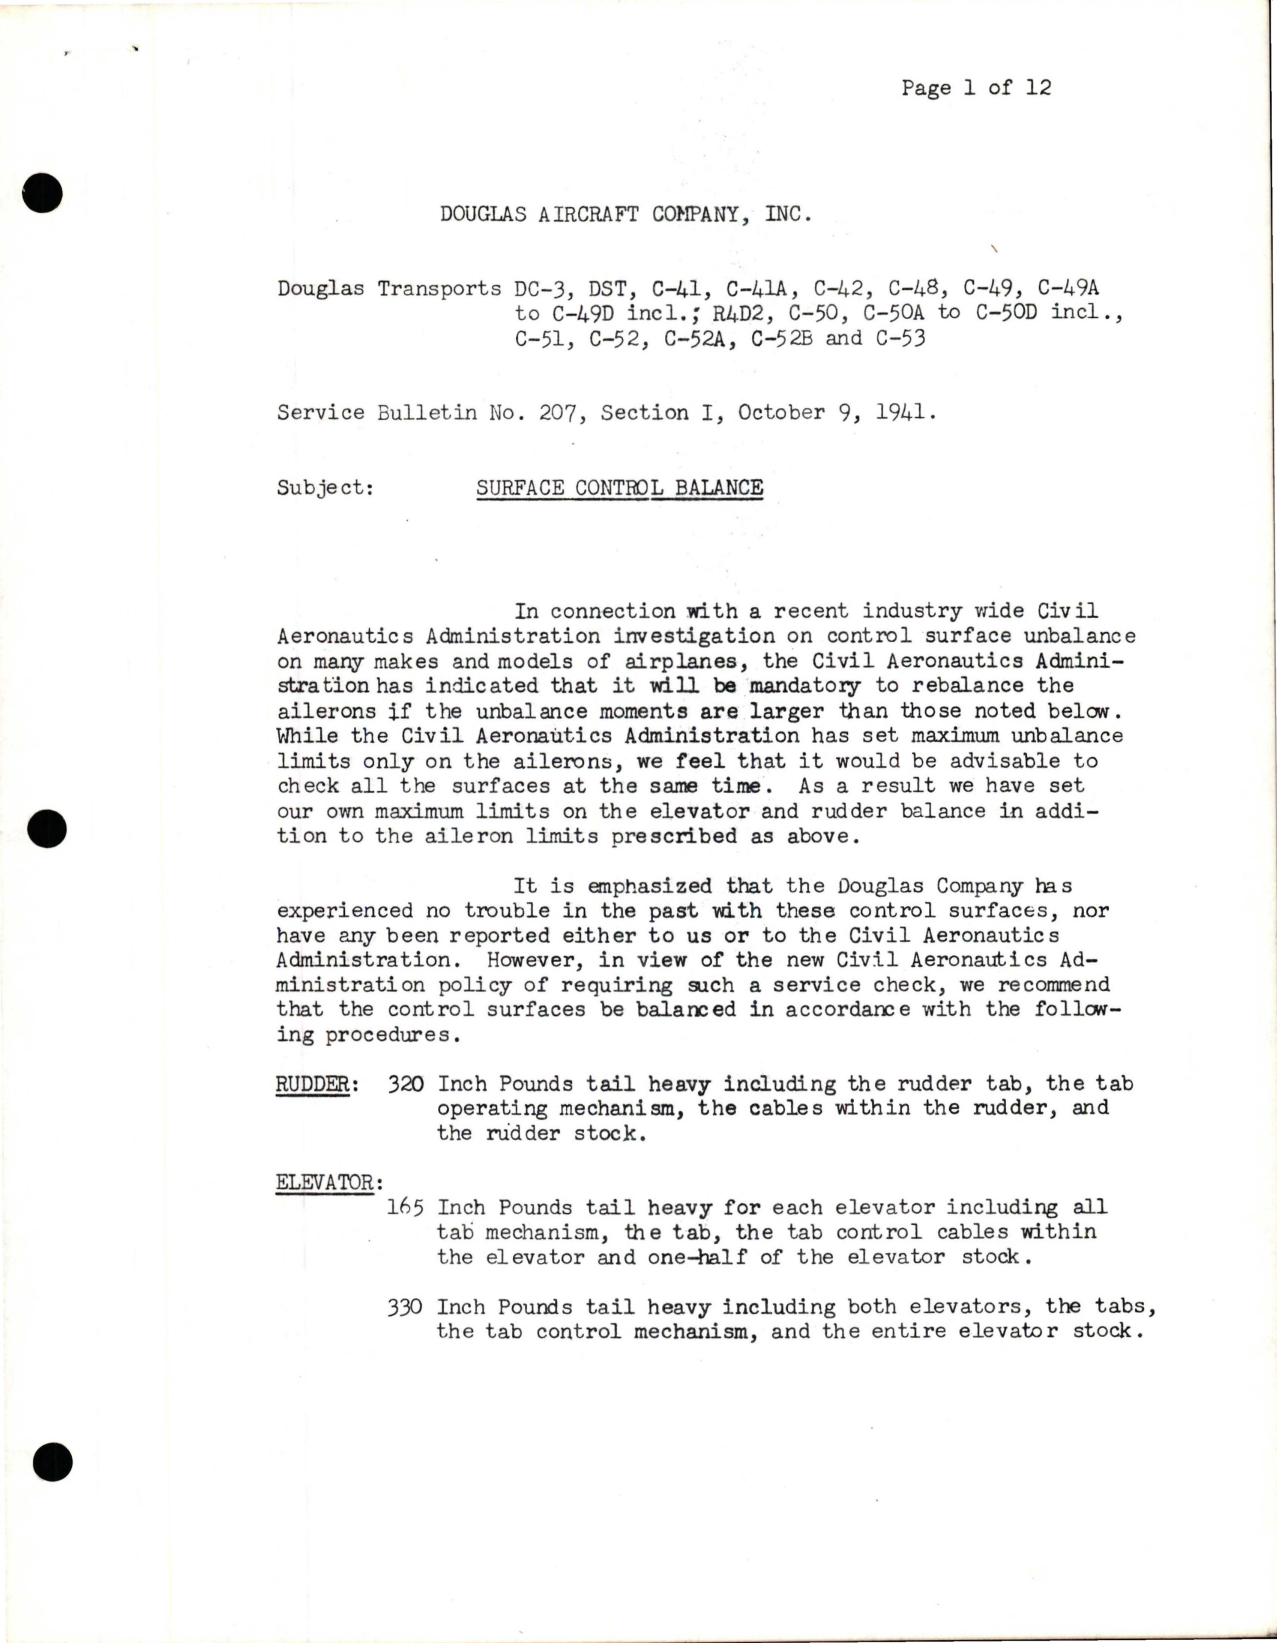 Sample page 1 from AirCorps Library document: Surface Control Balance